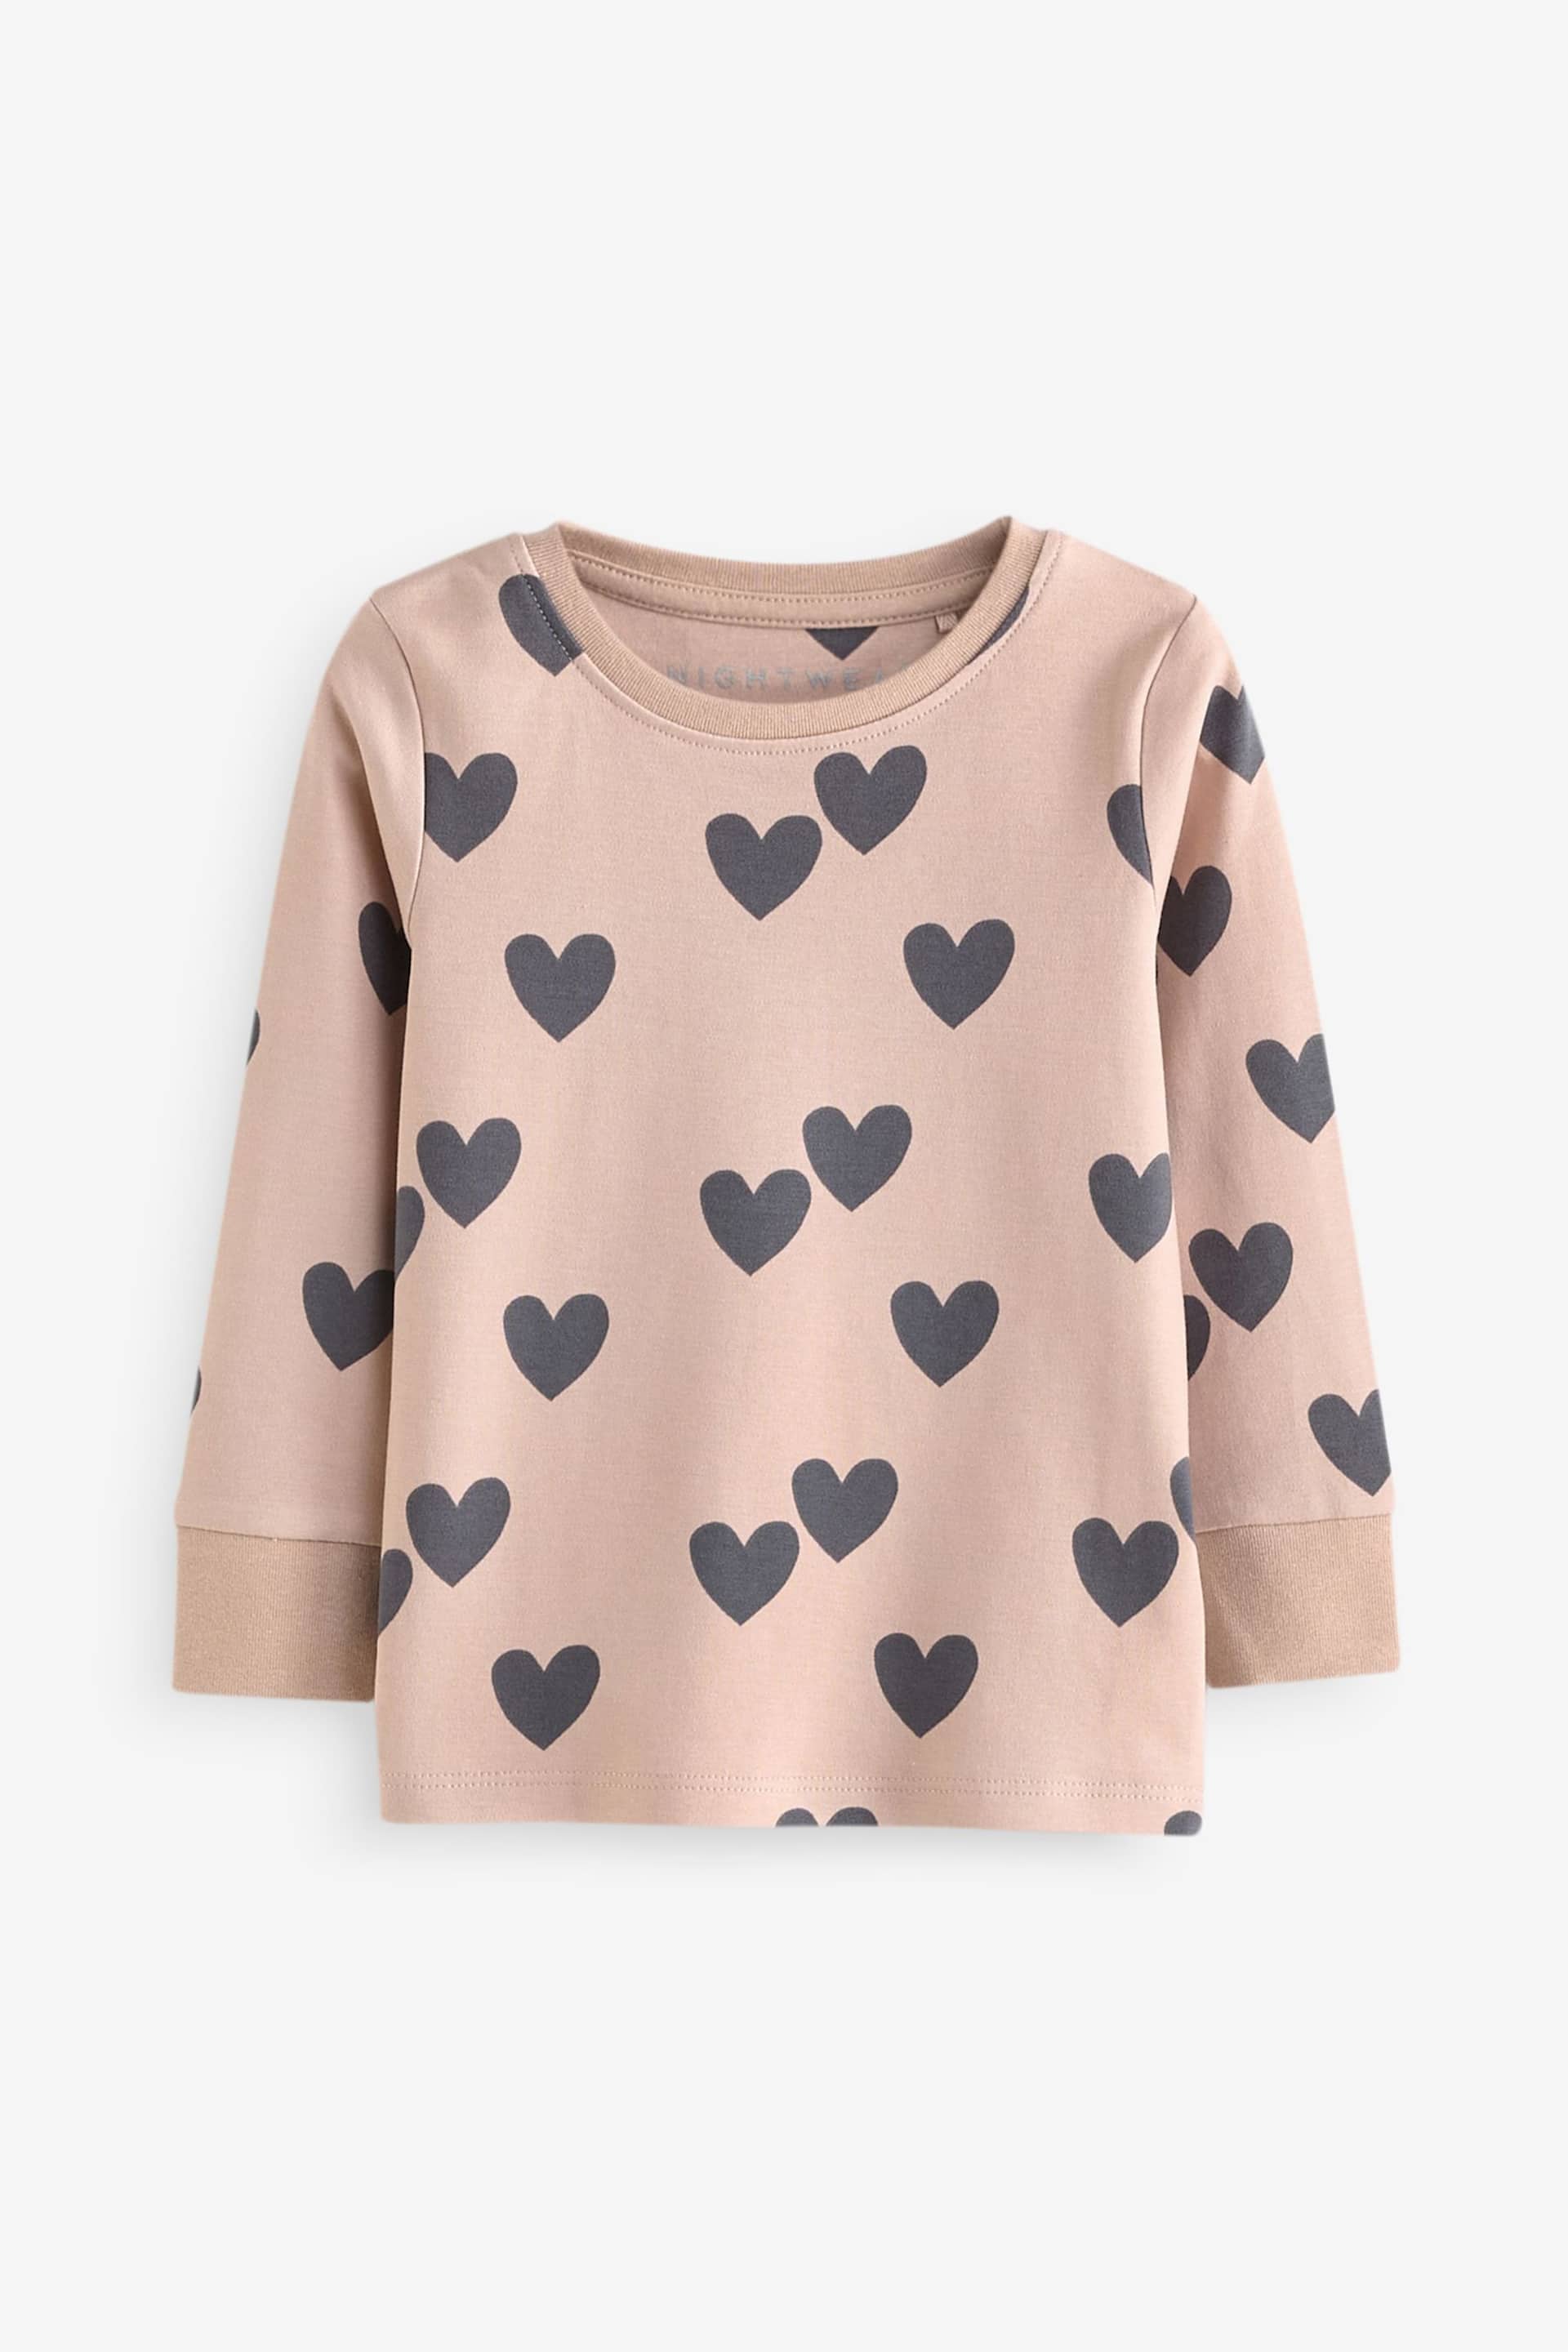 Neutral/ Pink Heart Stampy Pyjamas 3 Pack (9mths-16yrs) - Image 9 of 13